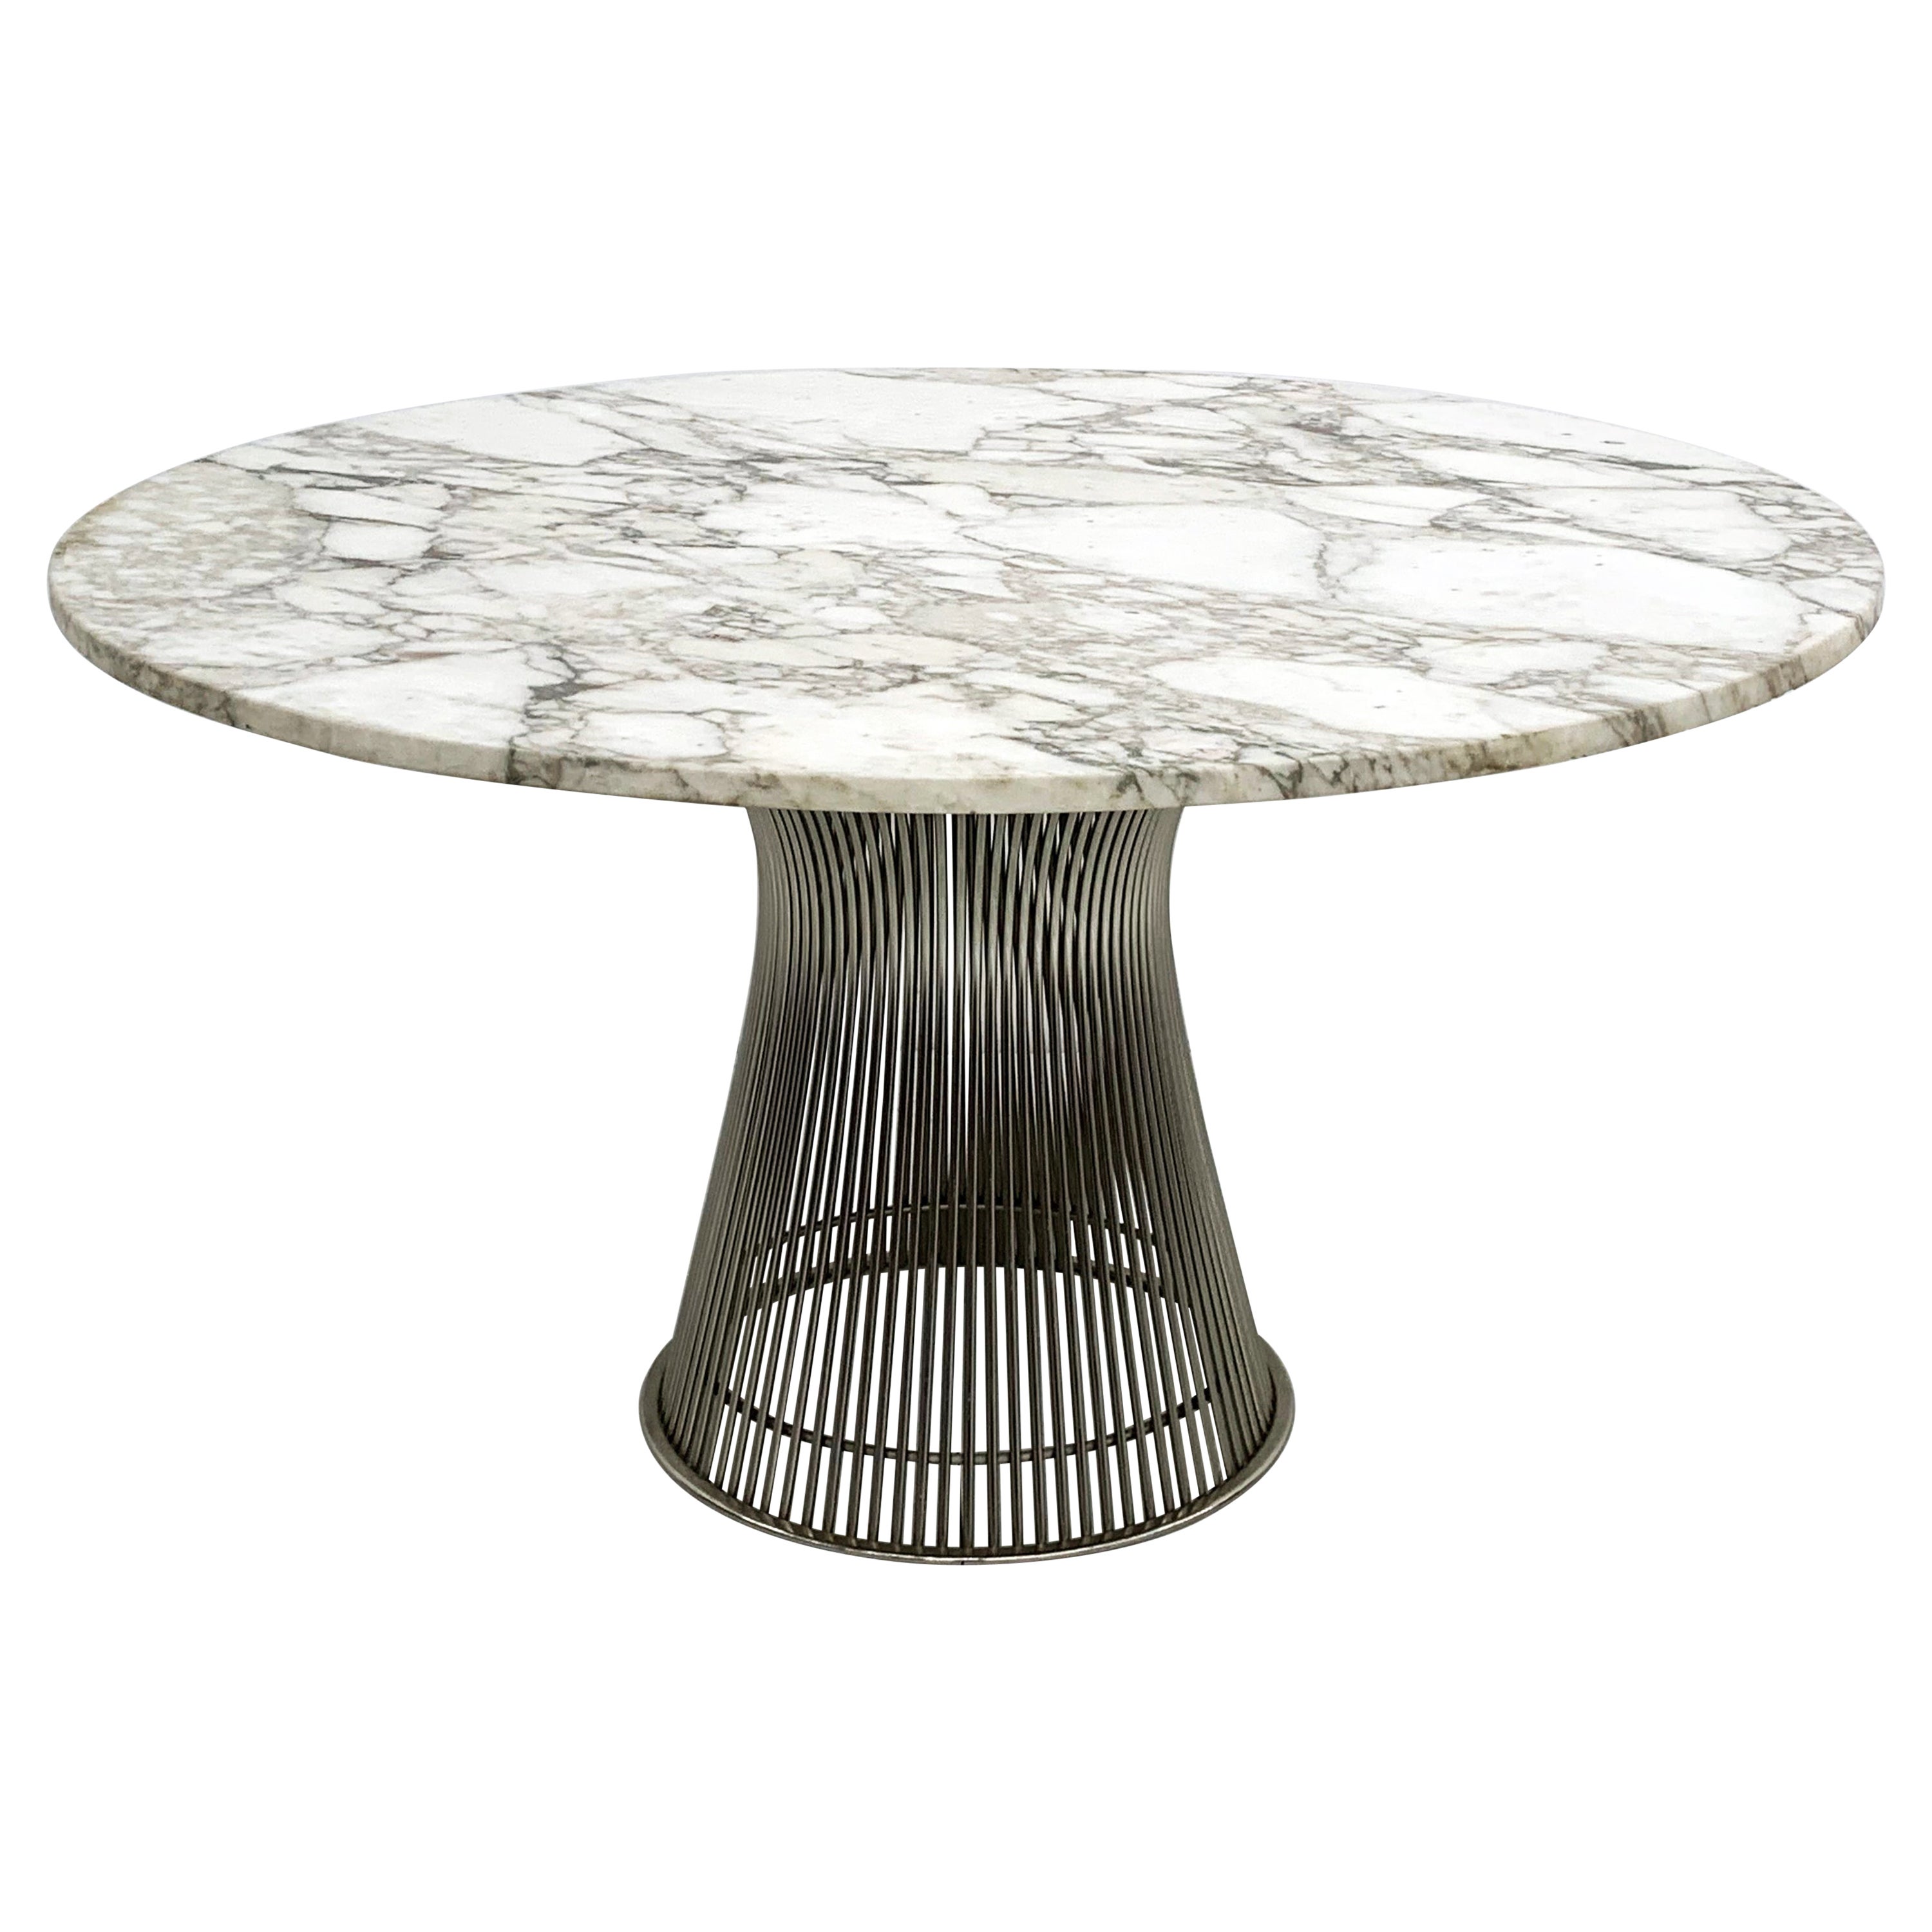 Warren Platner for Knoll Dining Table with Arabescato Marble Top